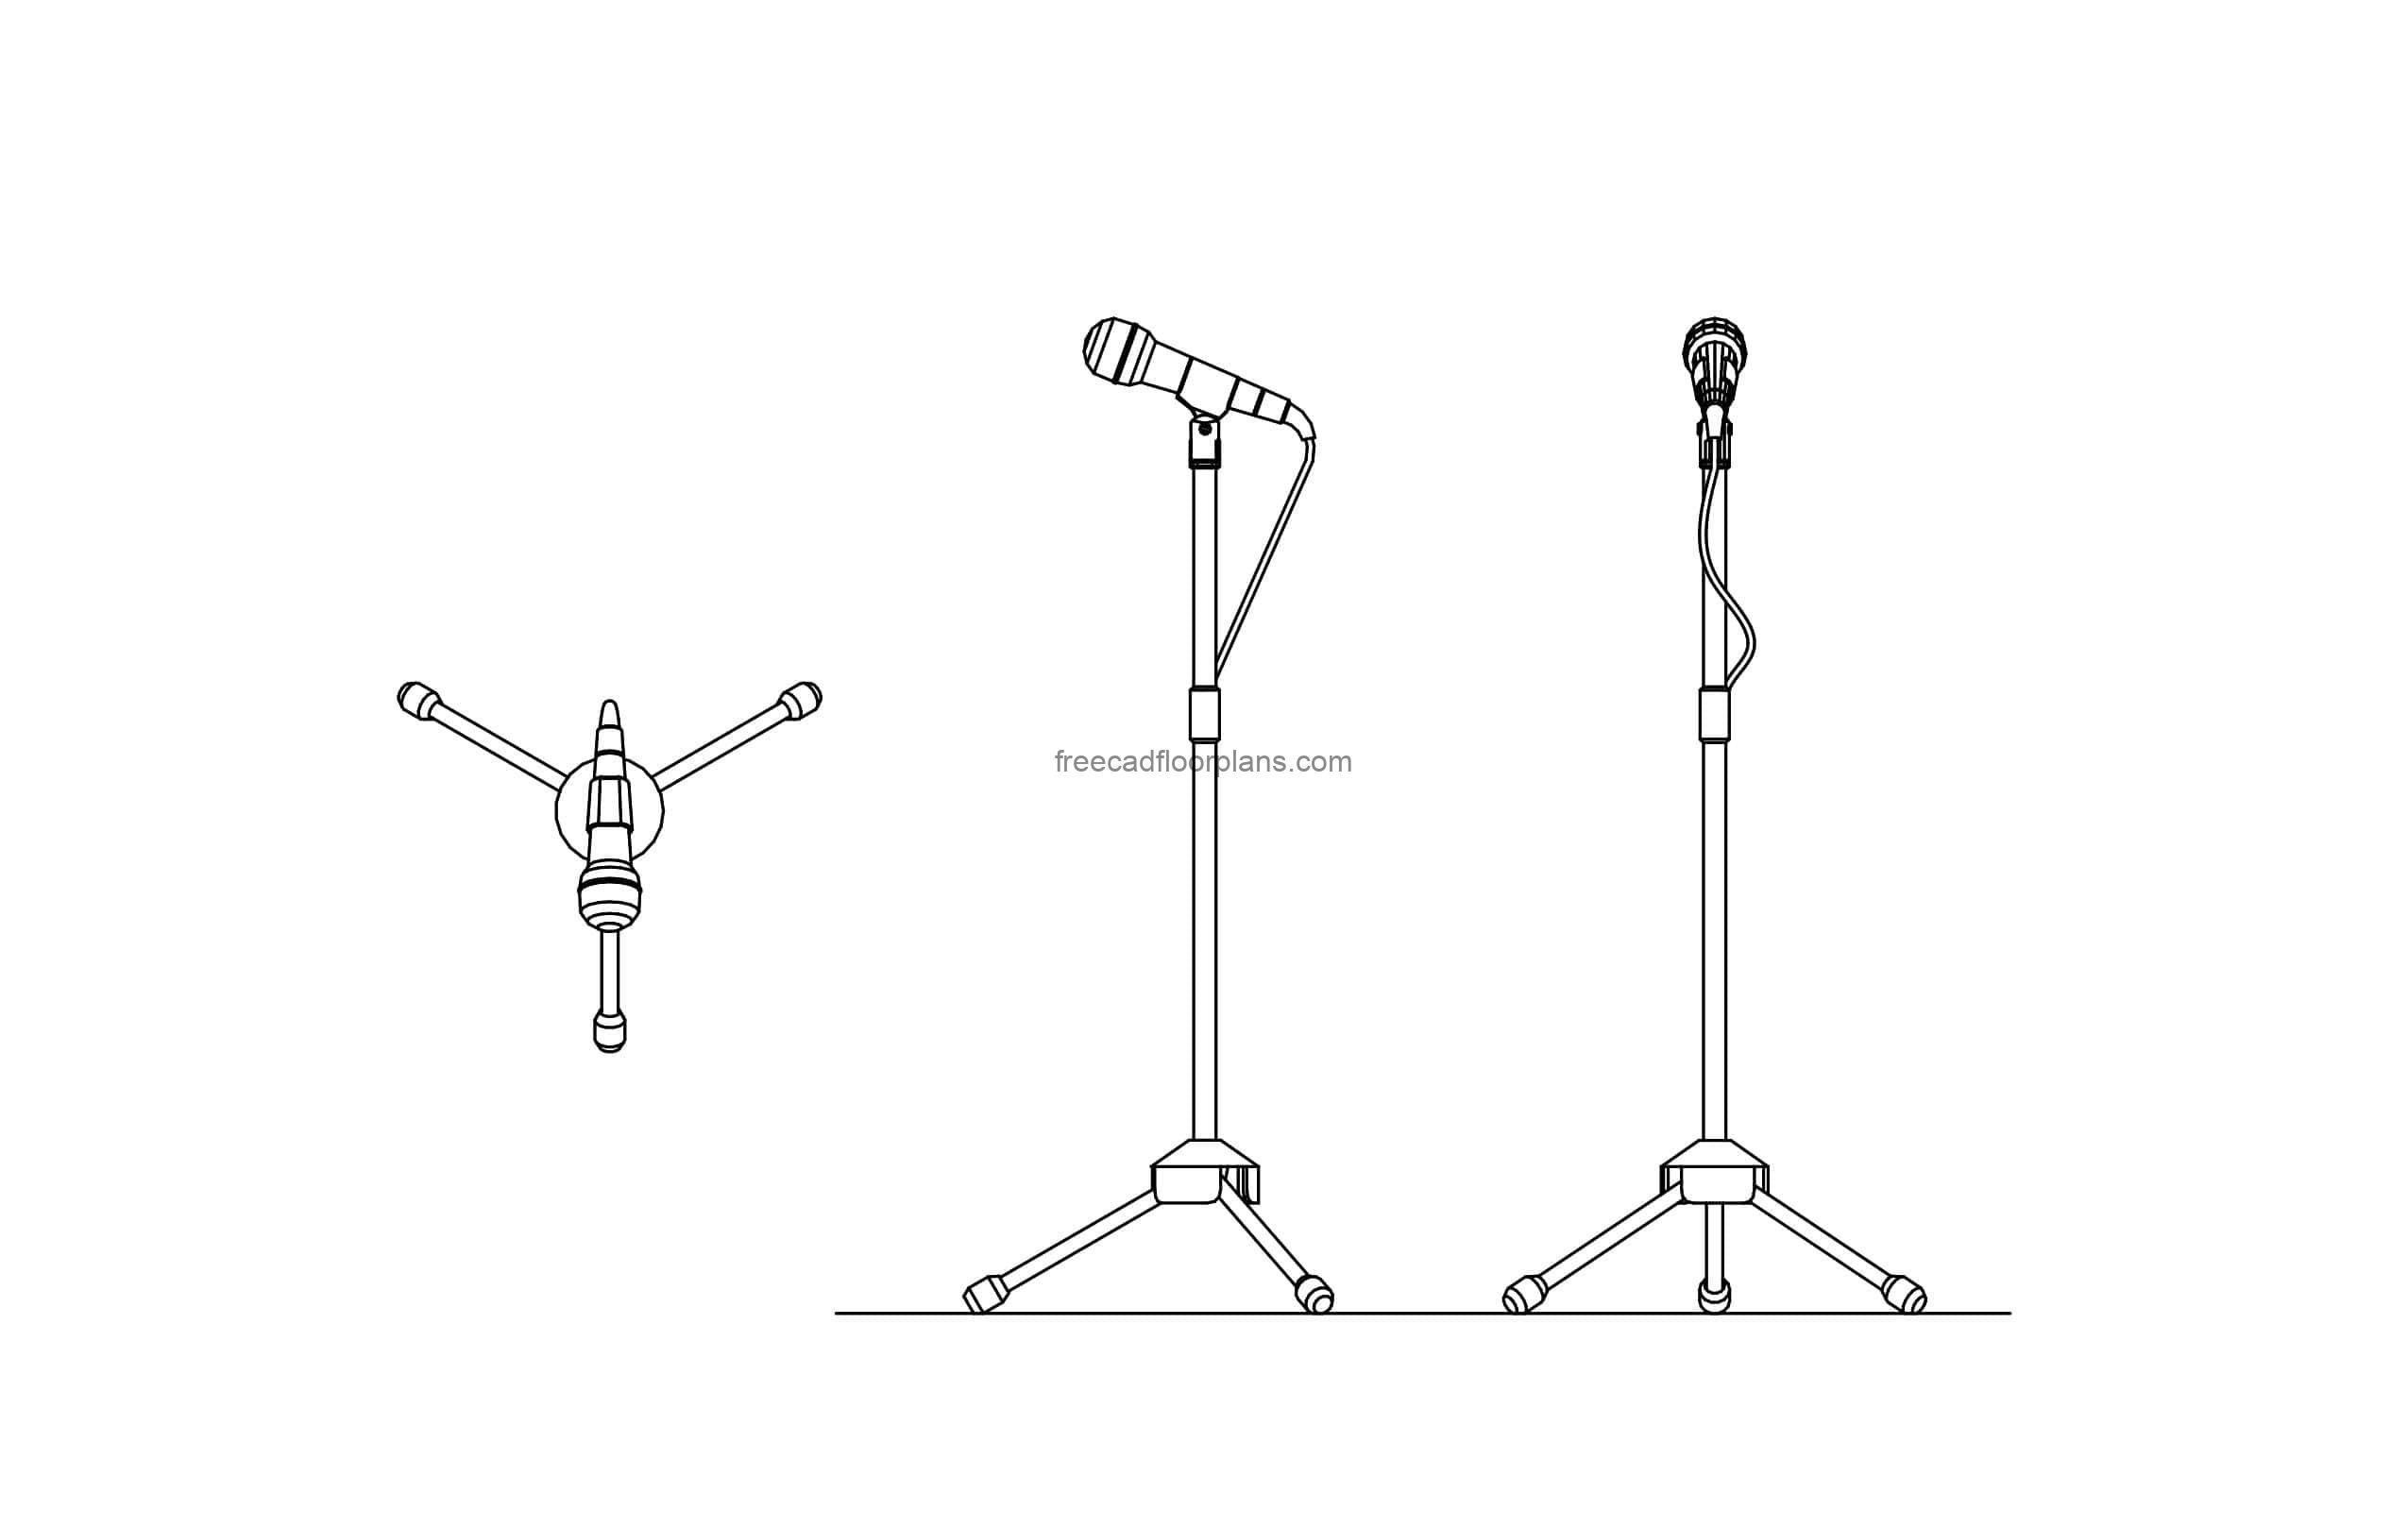 microphone dwg cad drawing fron and side elevations model for free download